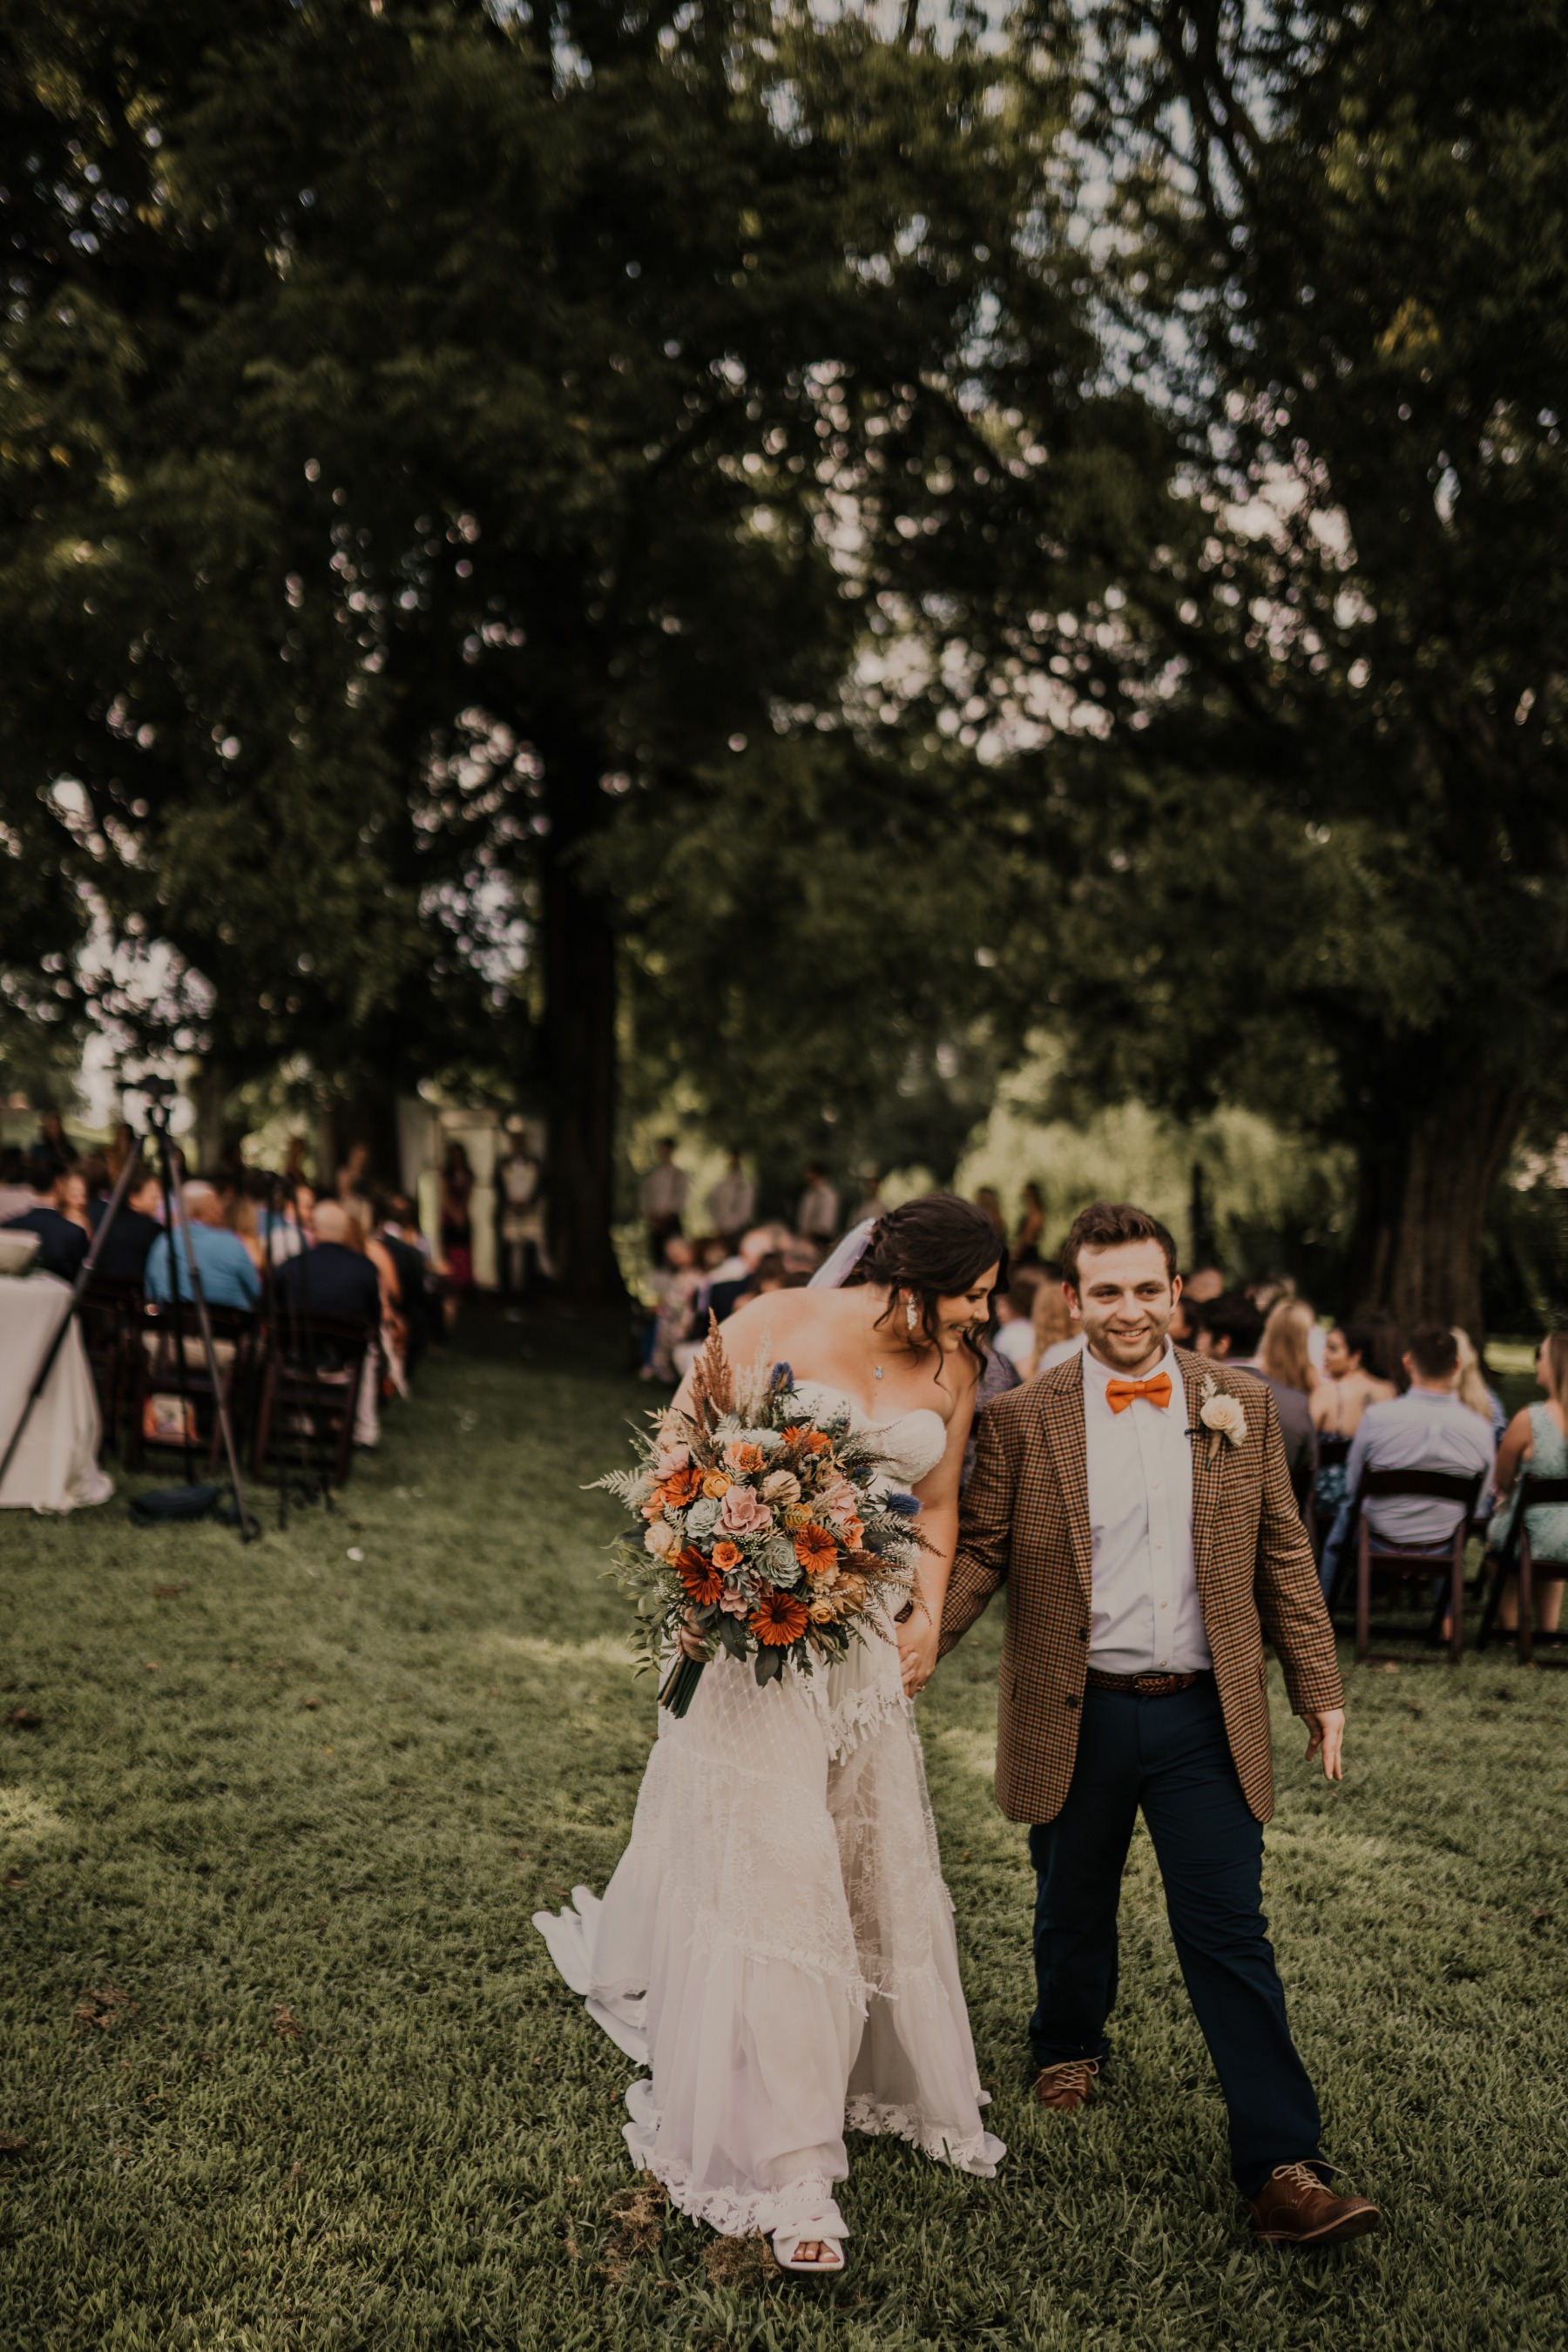 This Tennessee wedding proves ALL summer weddings need a hydrostation